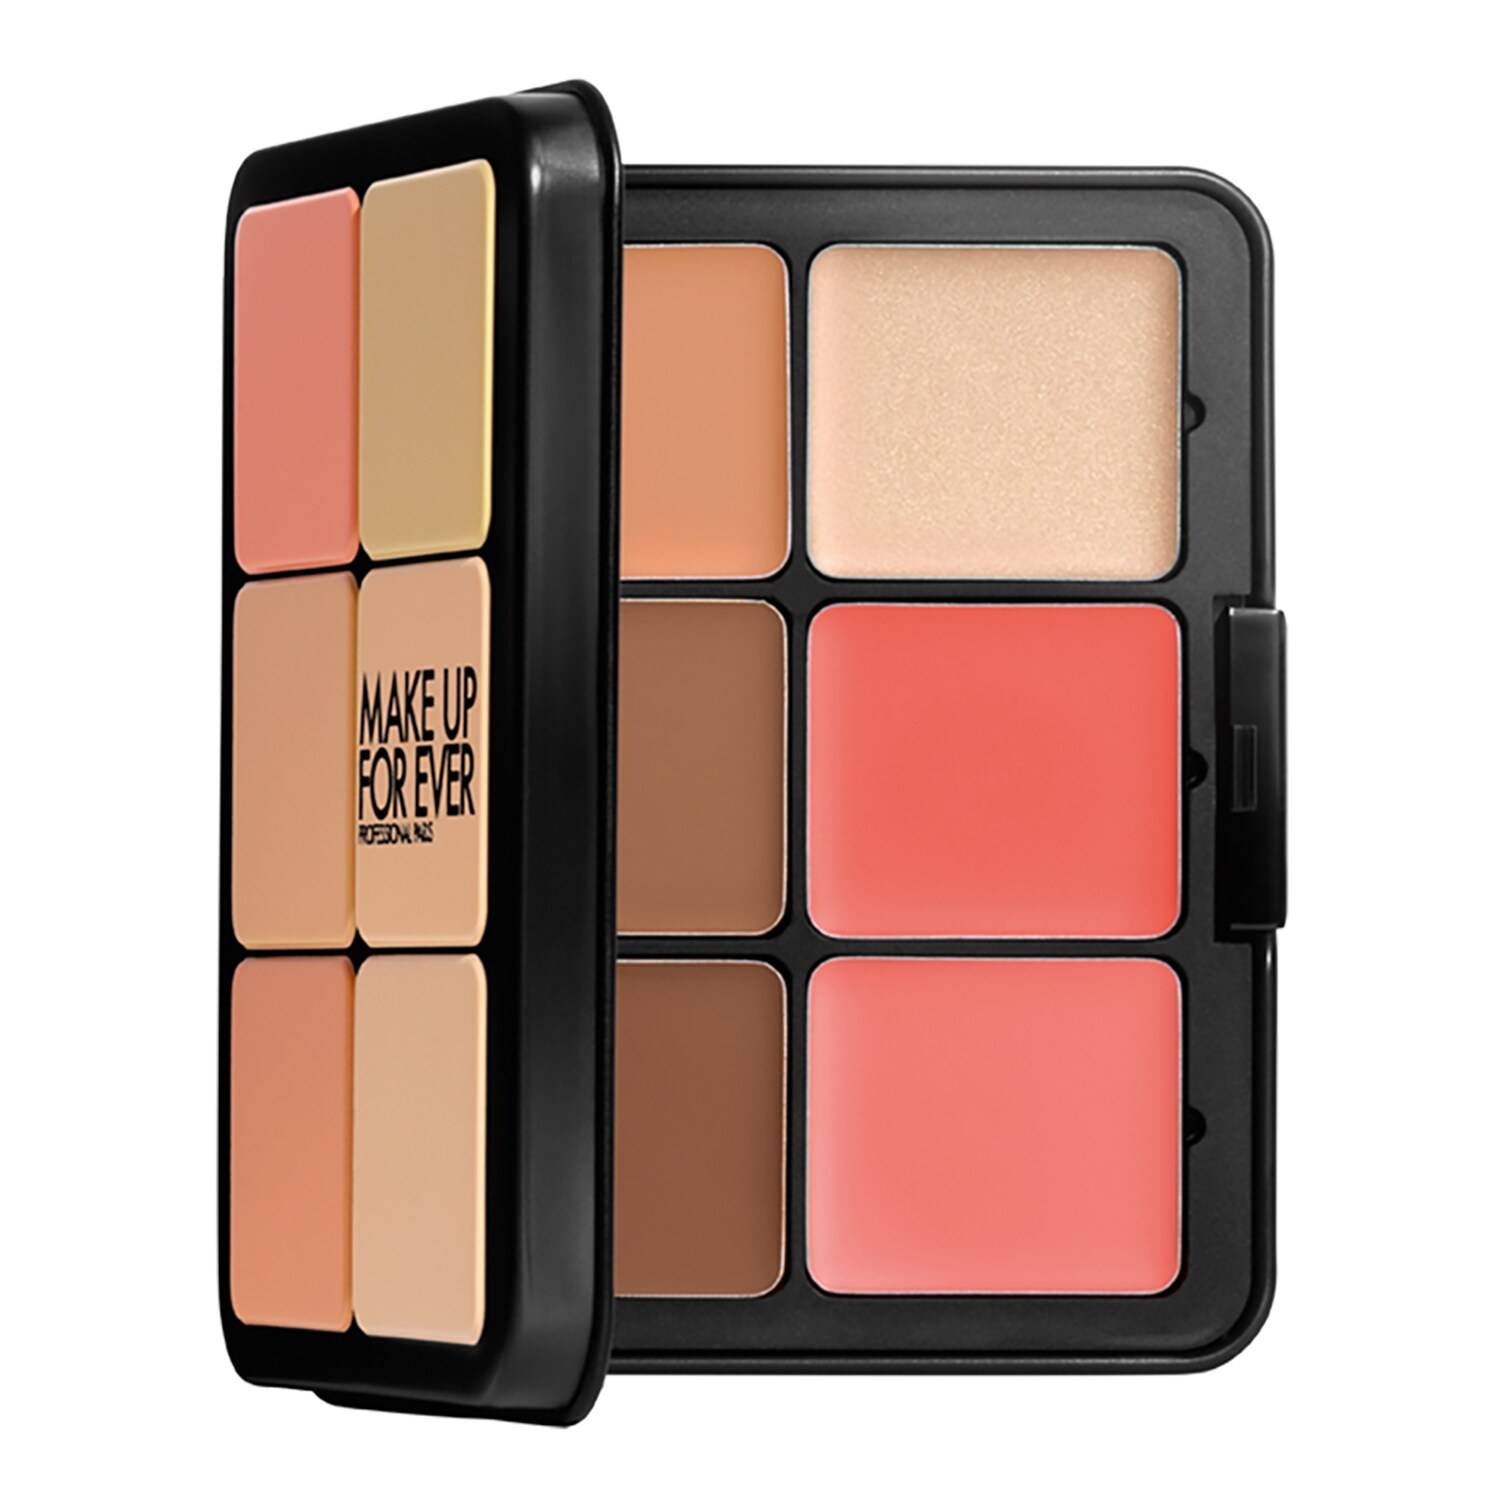 Make Up For Ever Hd Skin All-In-One Palette Harmony 1 26.5G